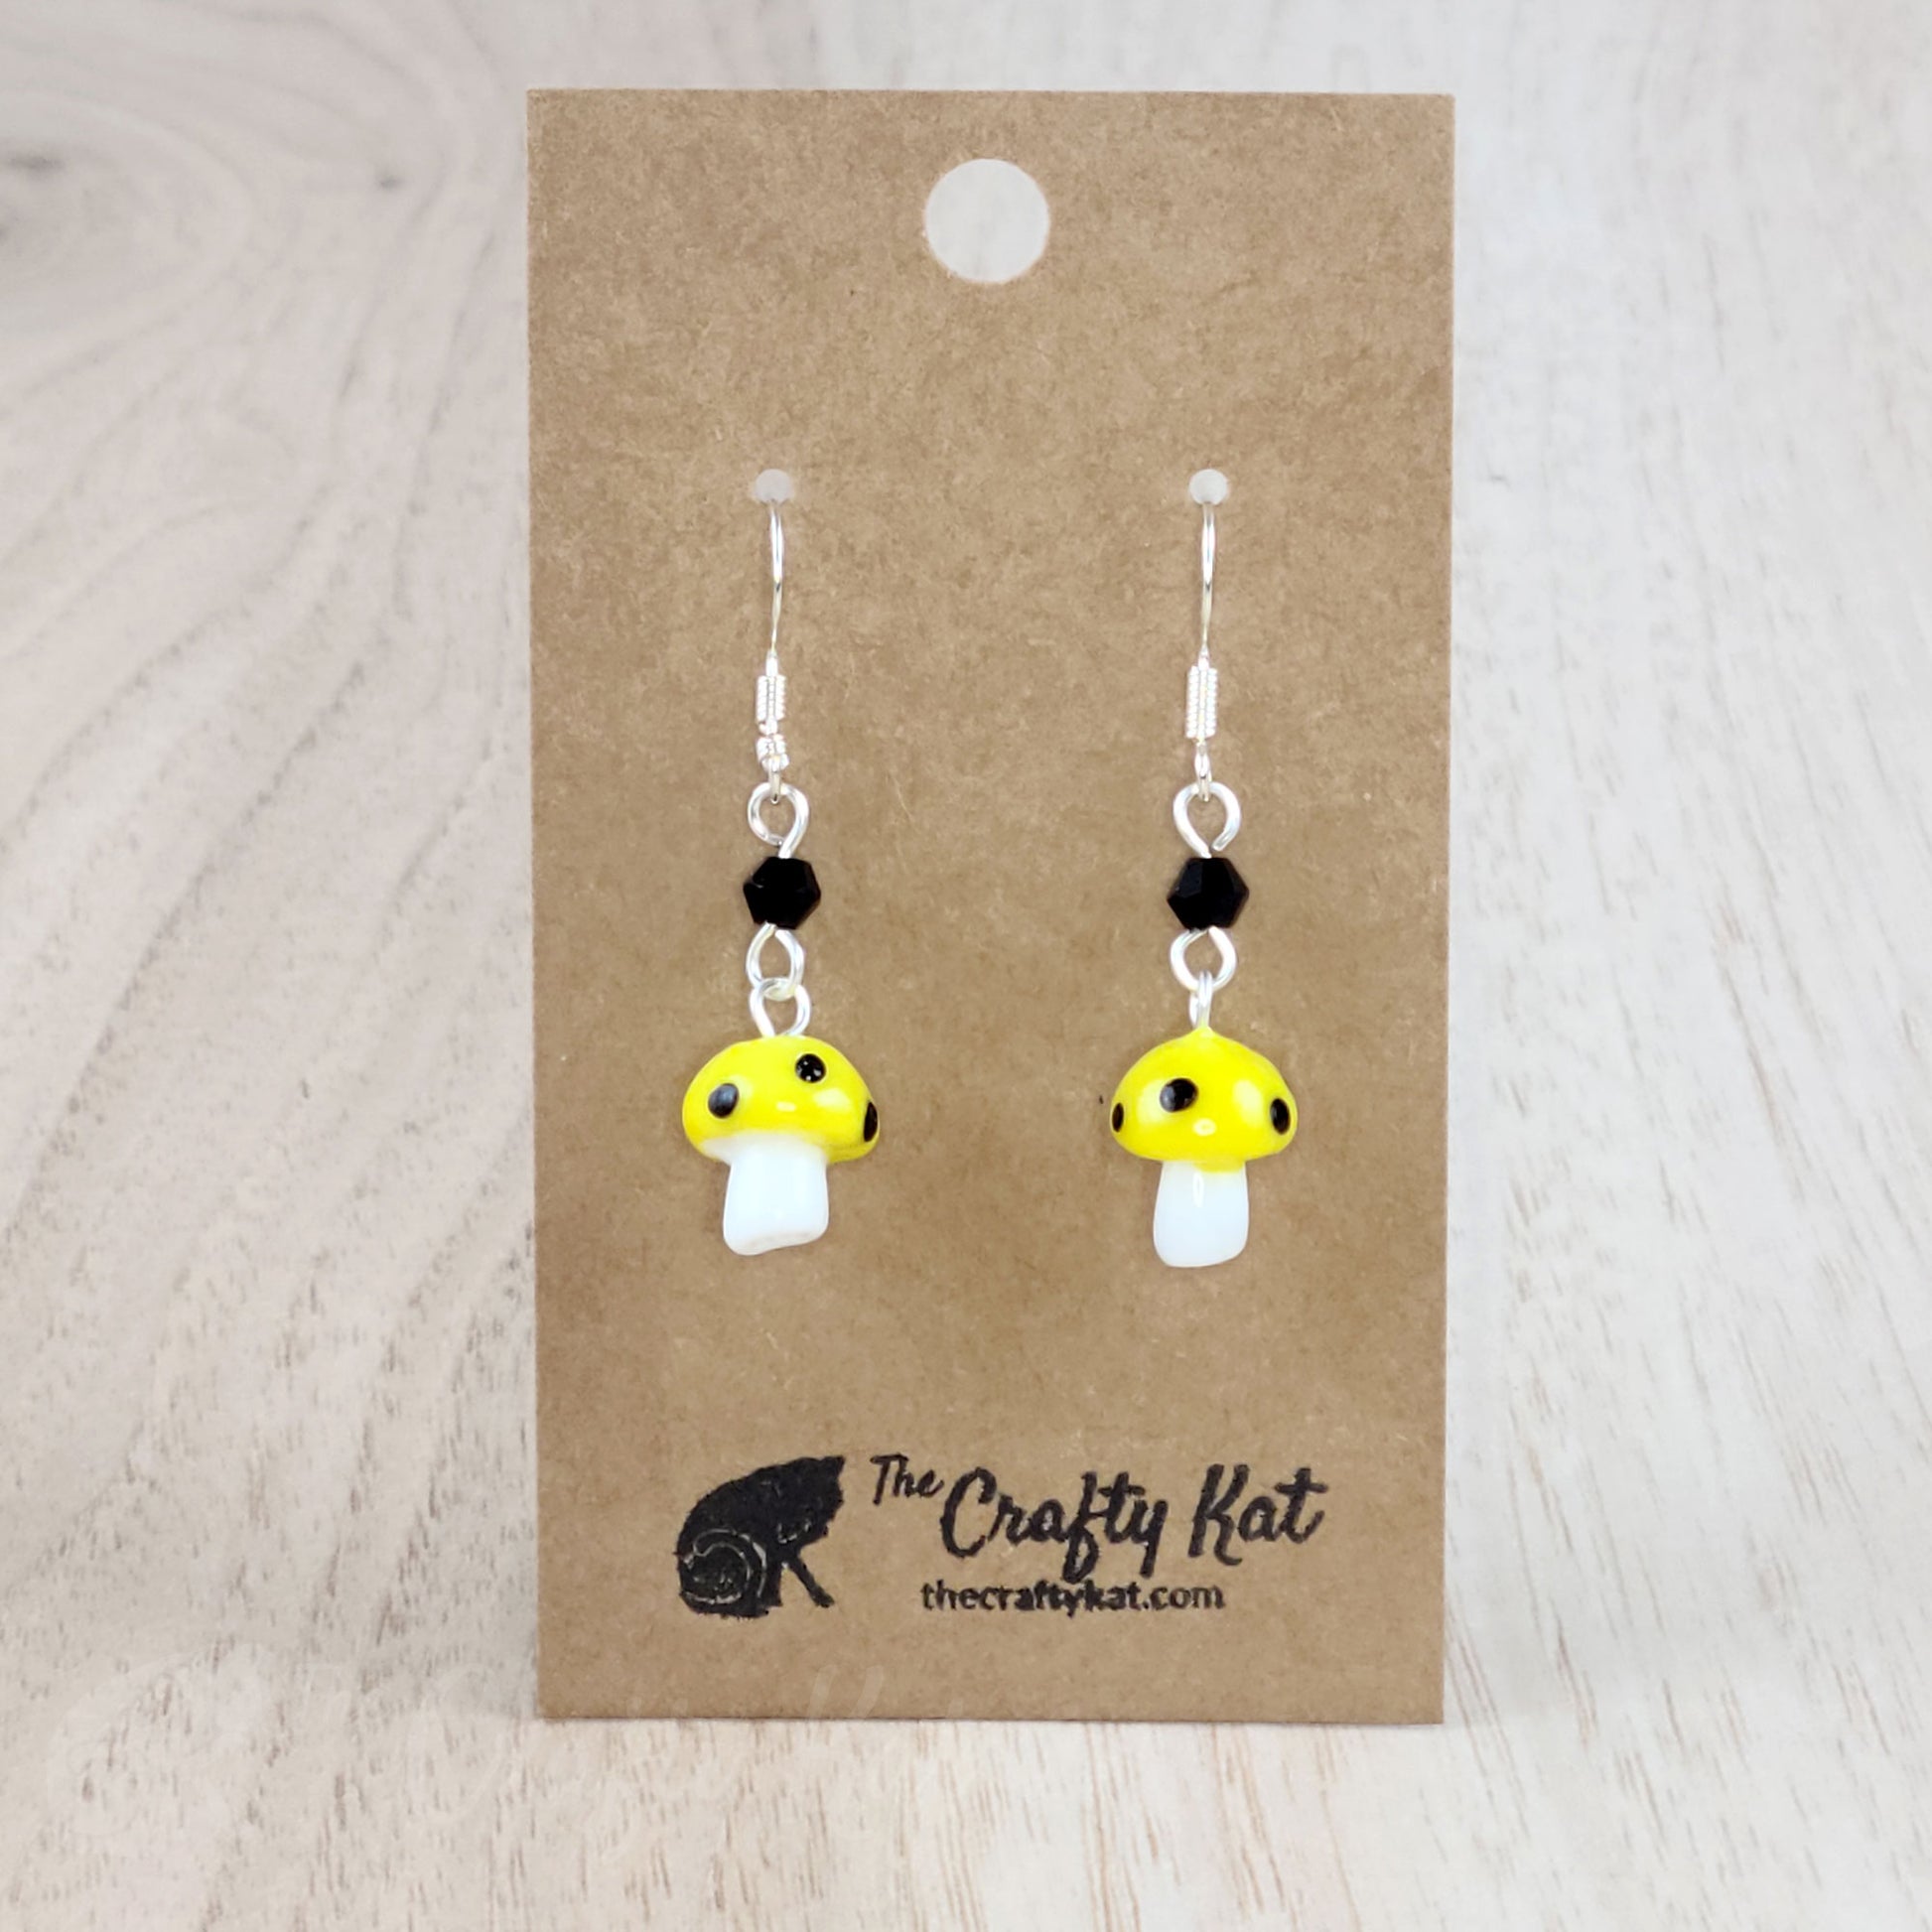 Mushroom-shaped tiered earrings made of lampwork and pressed glass beads with silver-plated base metal fittings. These mushrooms are yellow with black spots.